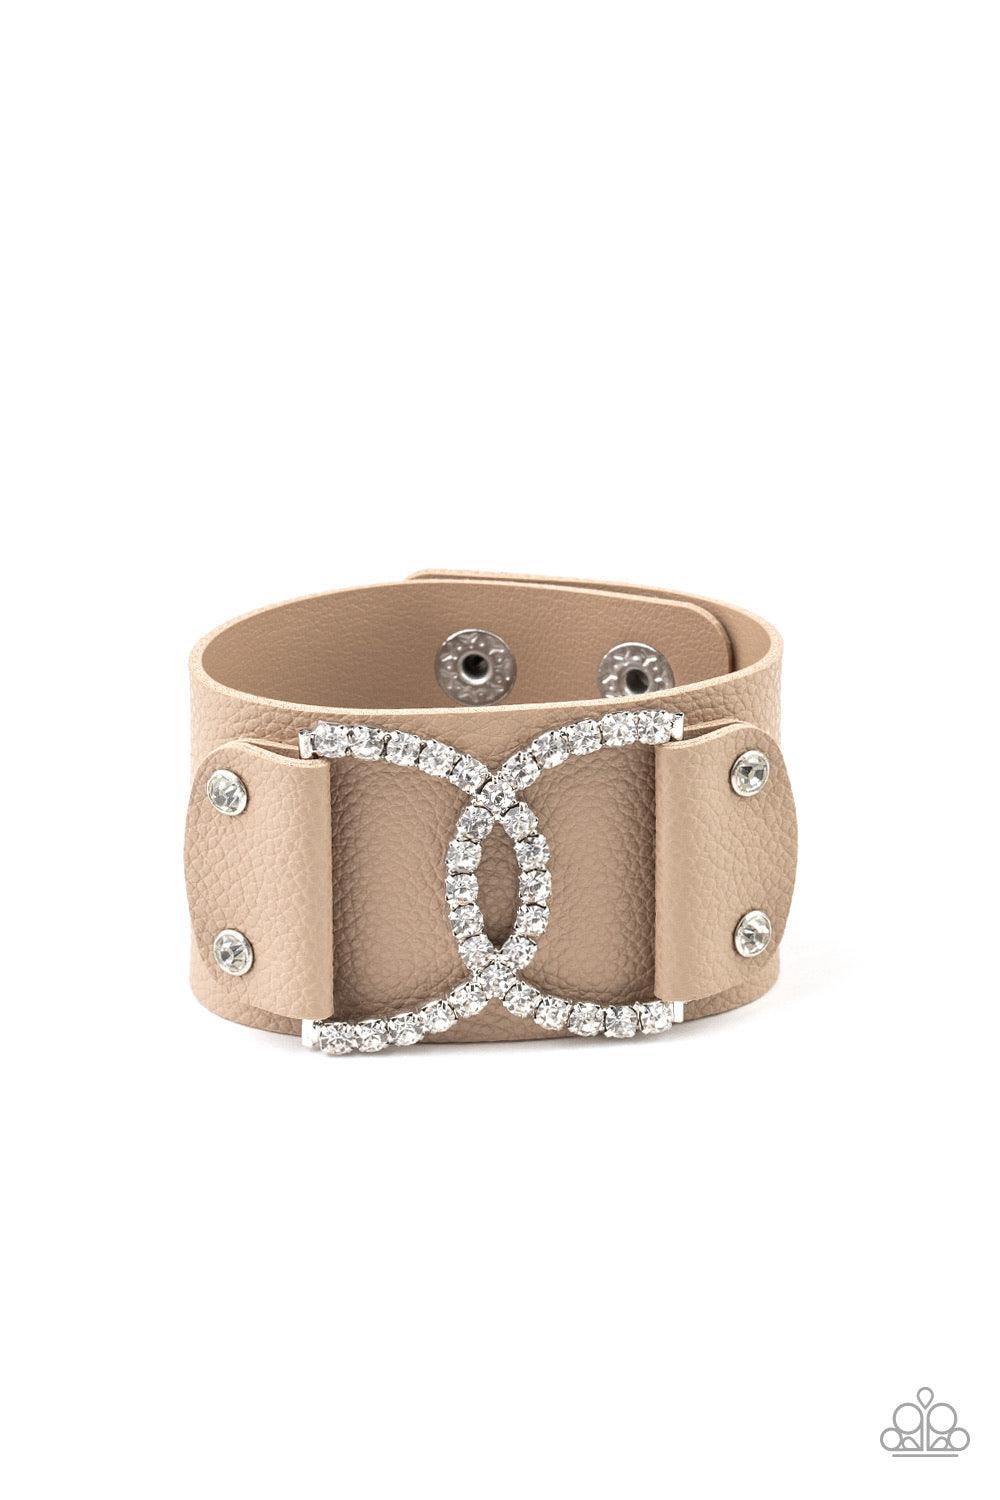 Paparazzi Accessories Couture Culture - Brown Encrusted in glassy white rhinestones, two interlocking half moon silver frames are studded in place across the front of a brown leather band for a statement-making finish. Features an adjustable snap closure.